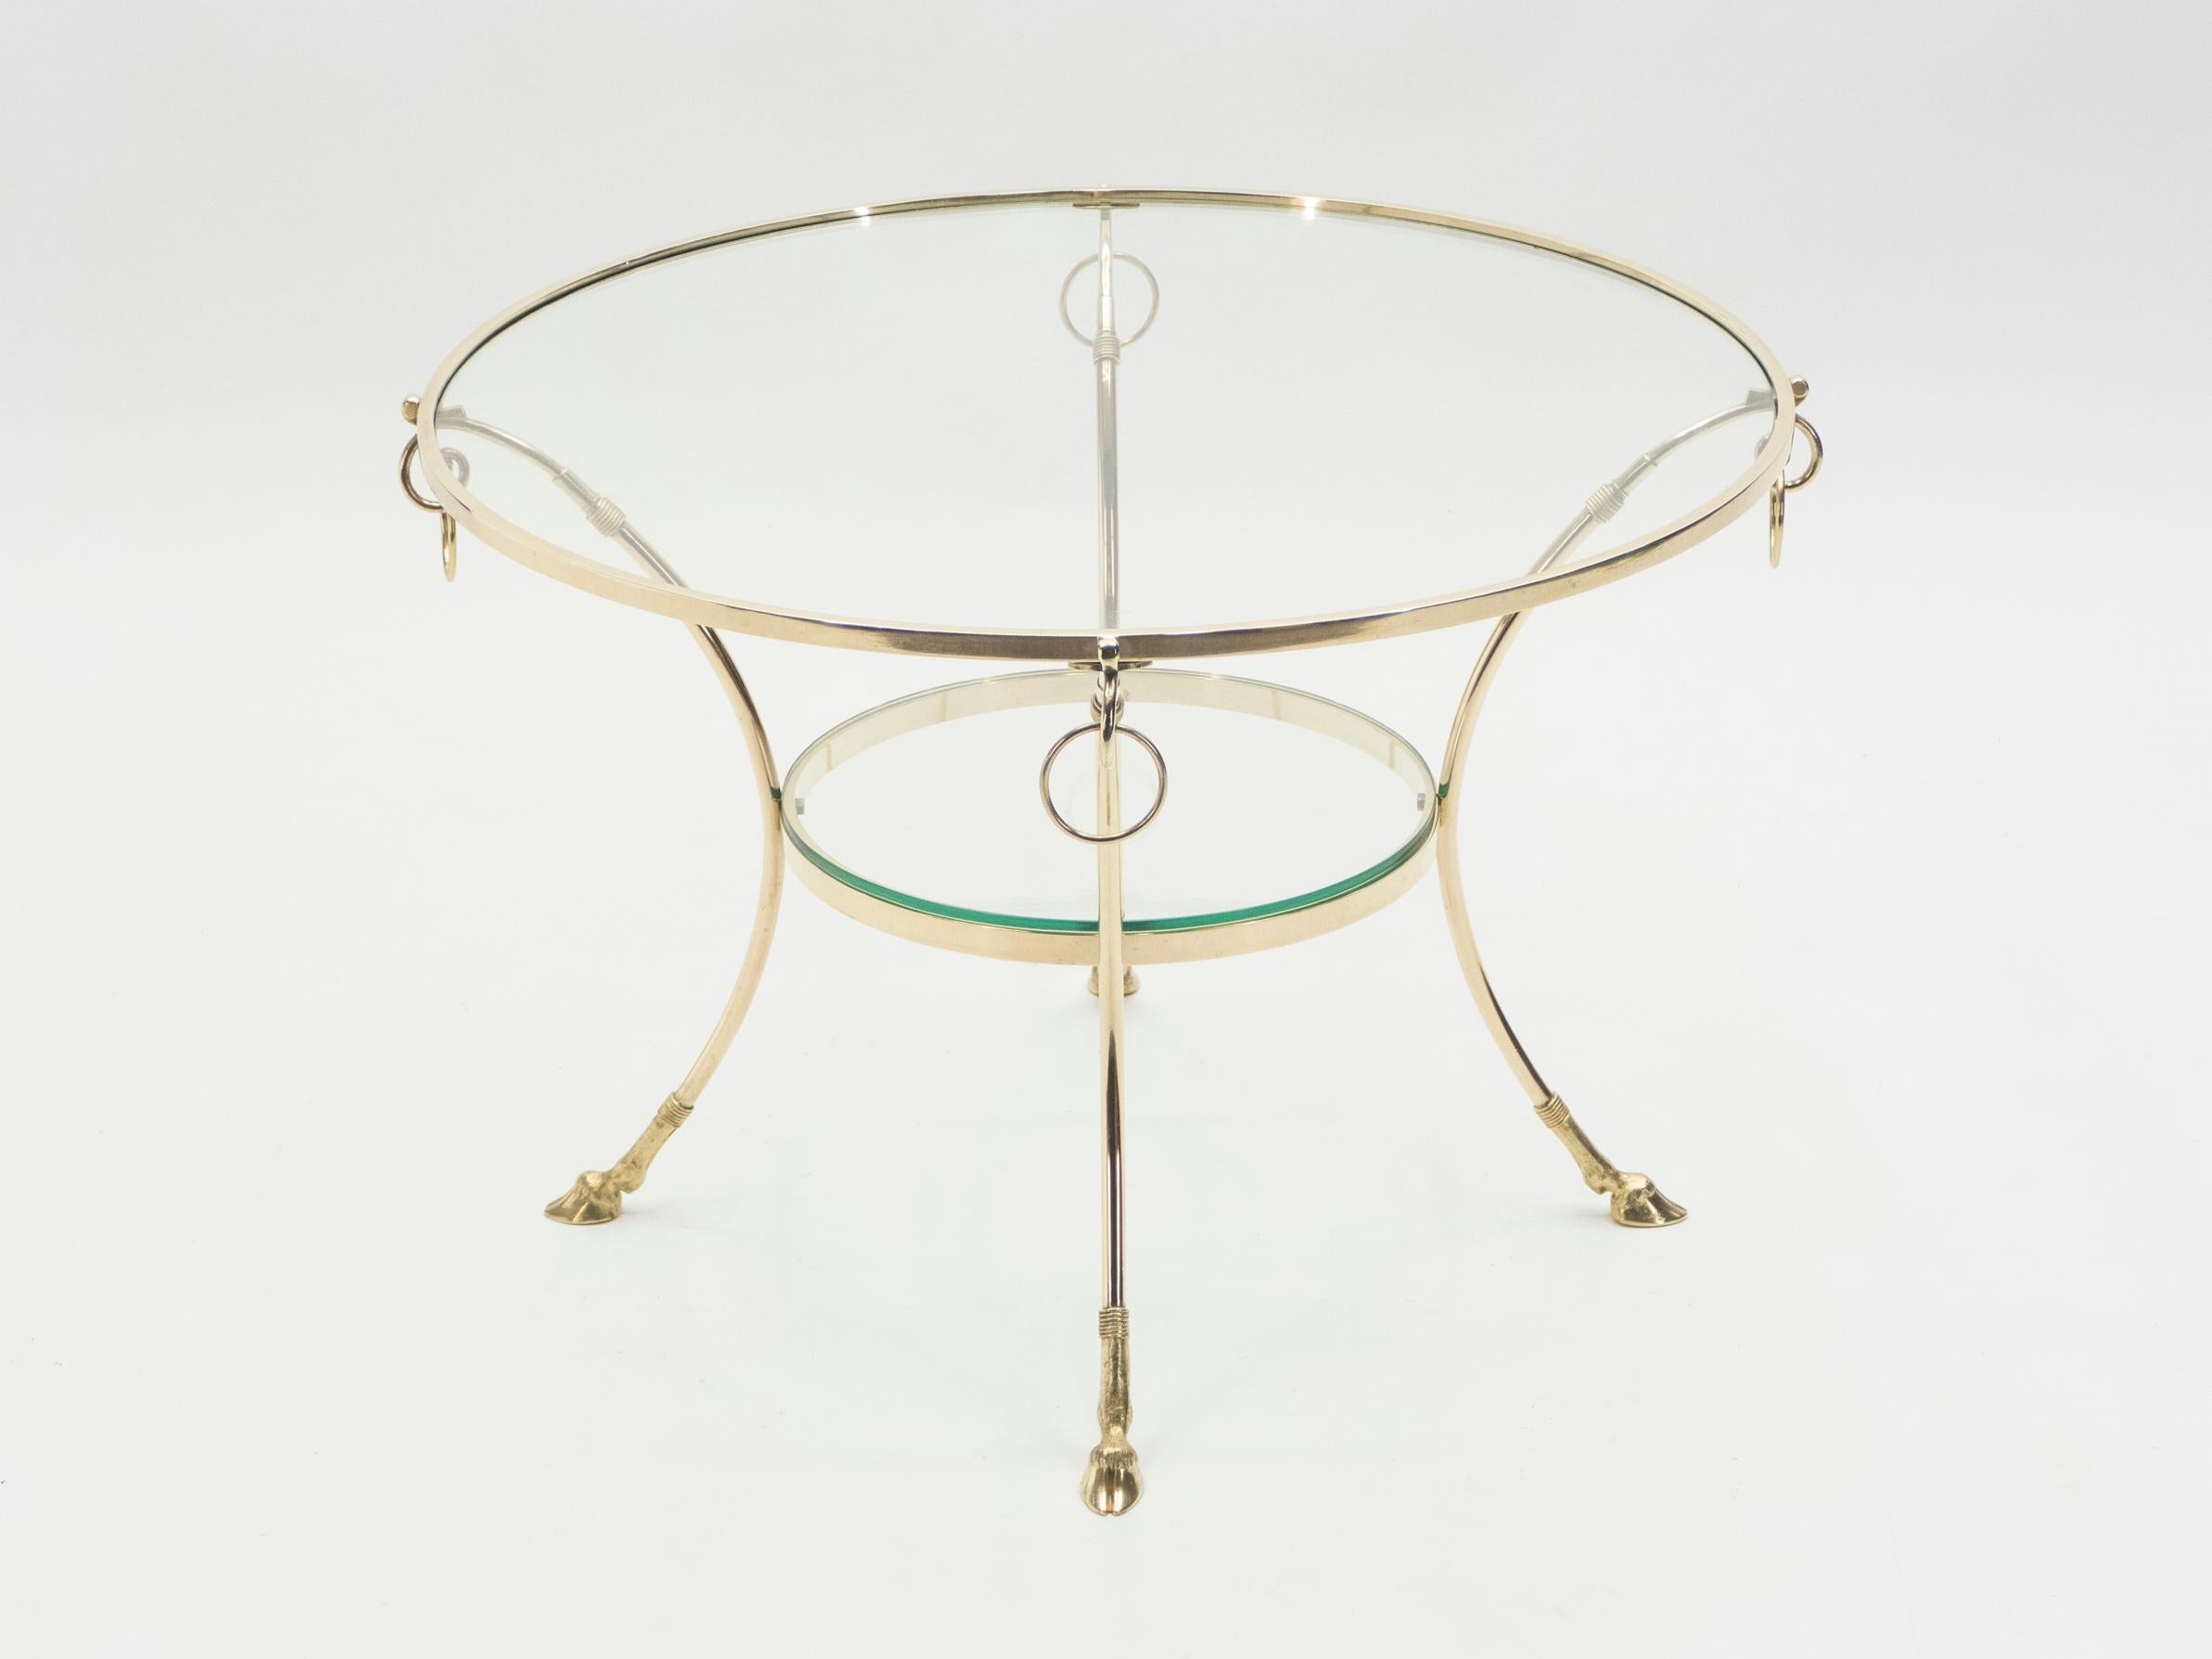 Large French Neoclassical Maison Charles Brass Gueridon Side Table, 1970s (Neoklassisch)